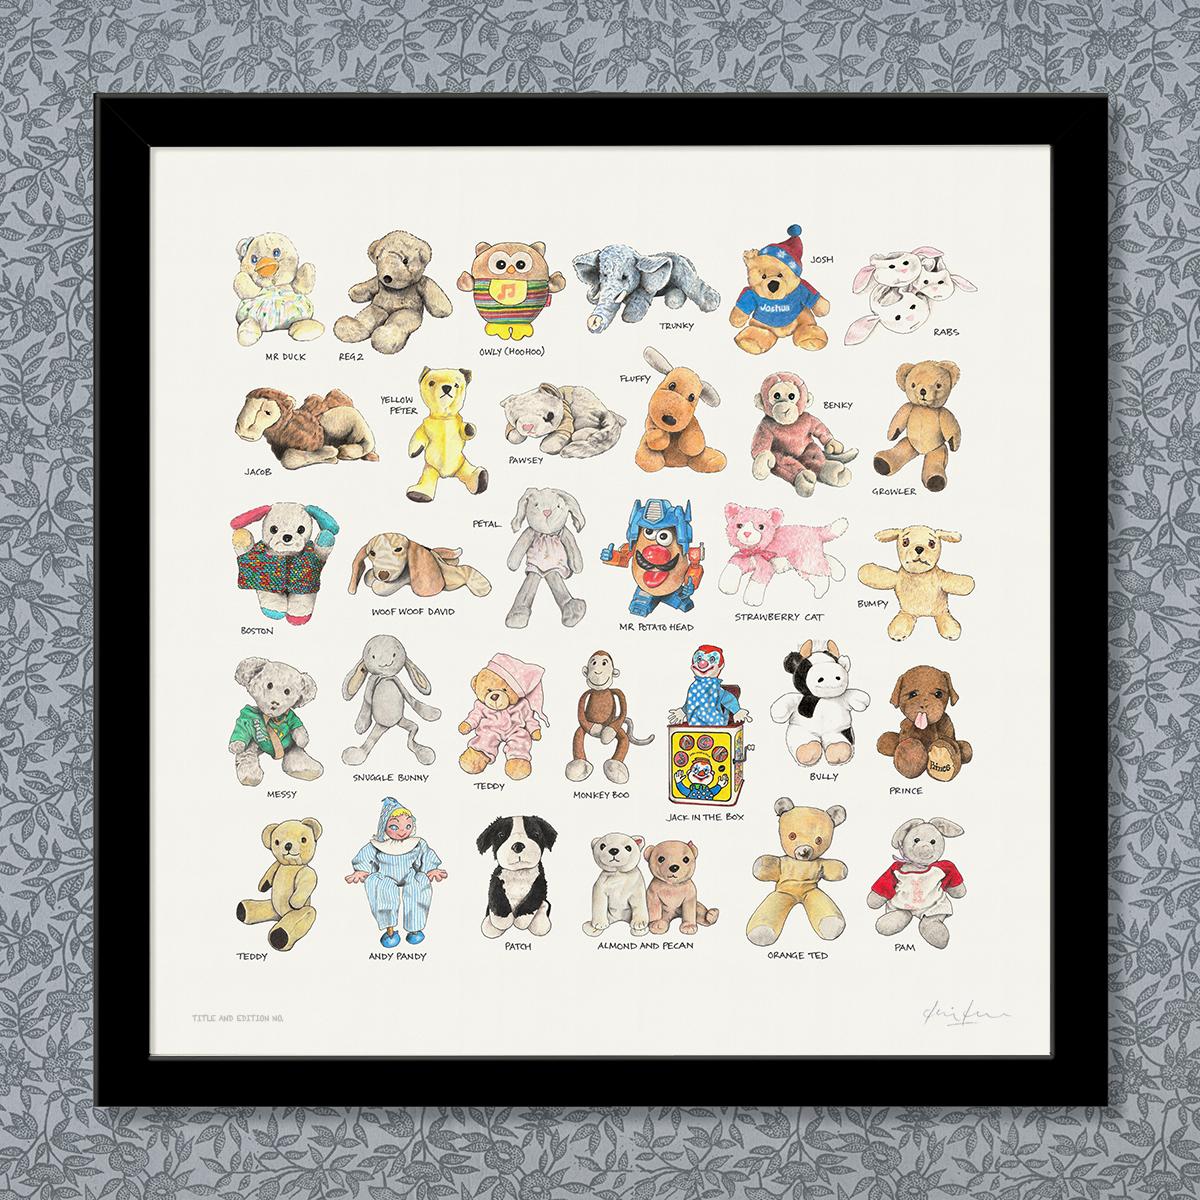 Limited edition montage print of sketches in pen, ink and coloured pencil of much loved toys, in black frame.